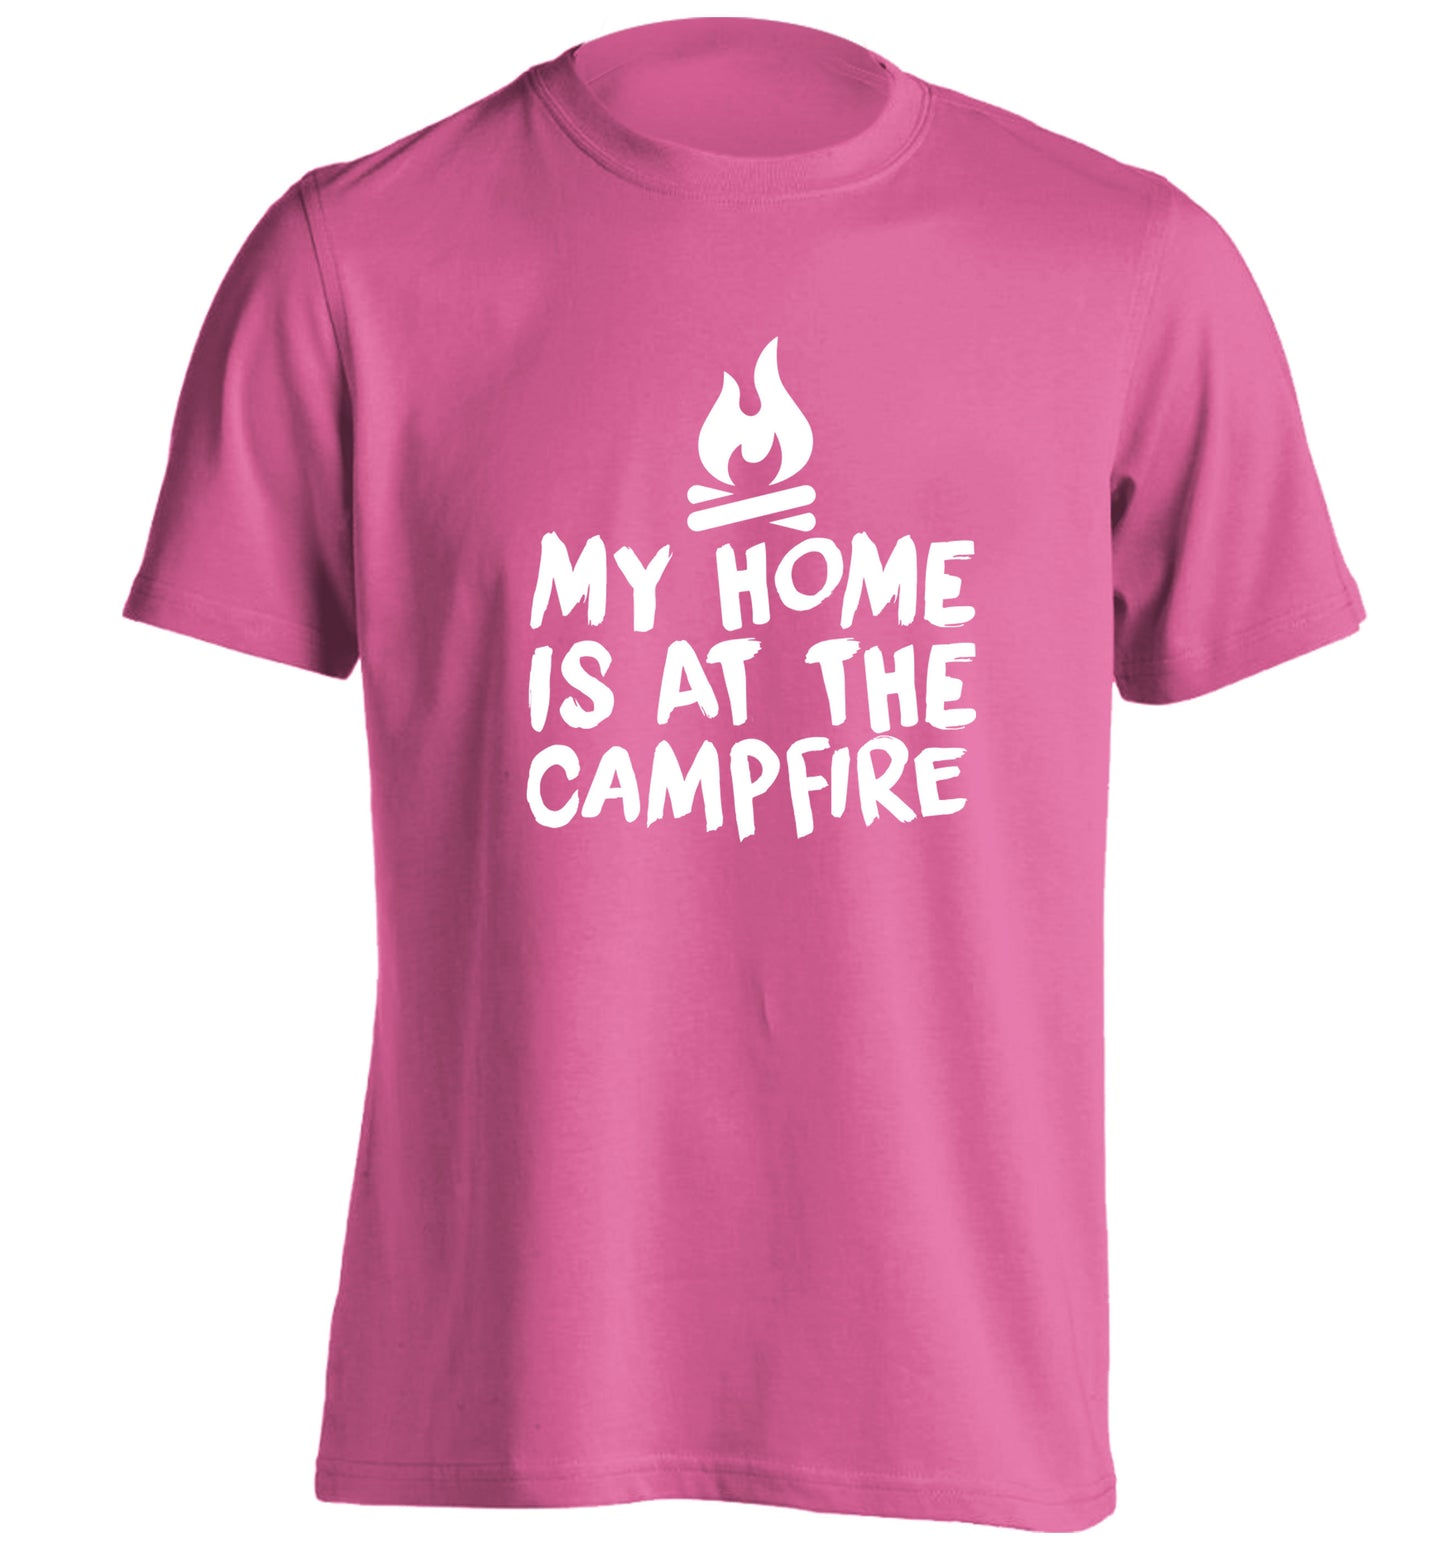 My home is at the campfire adults unisex pink Tshirt 2XL